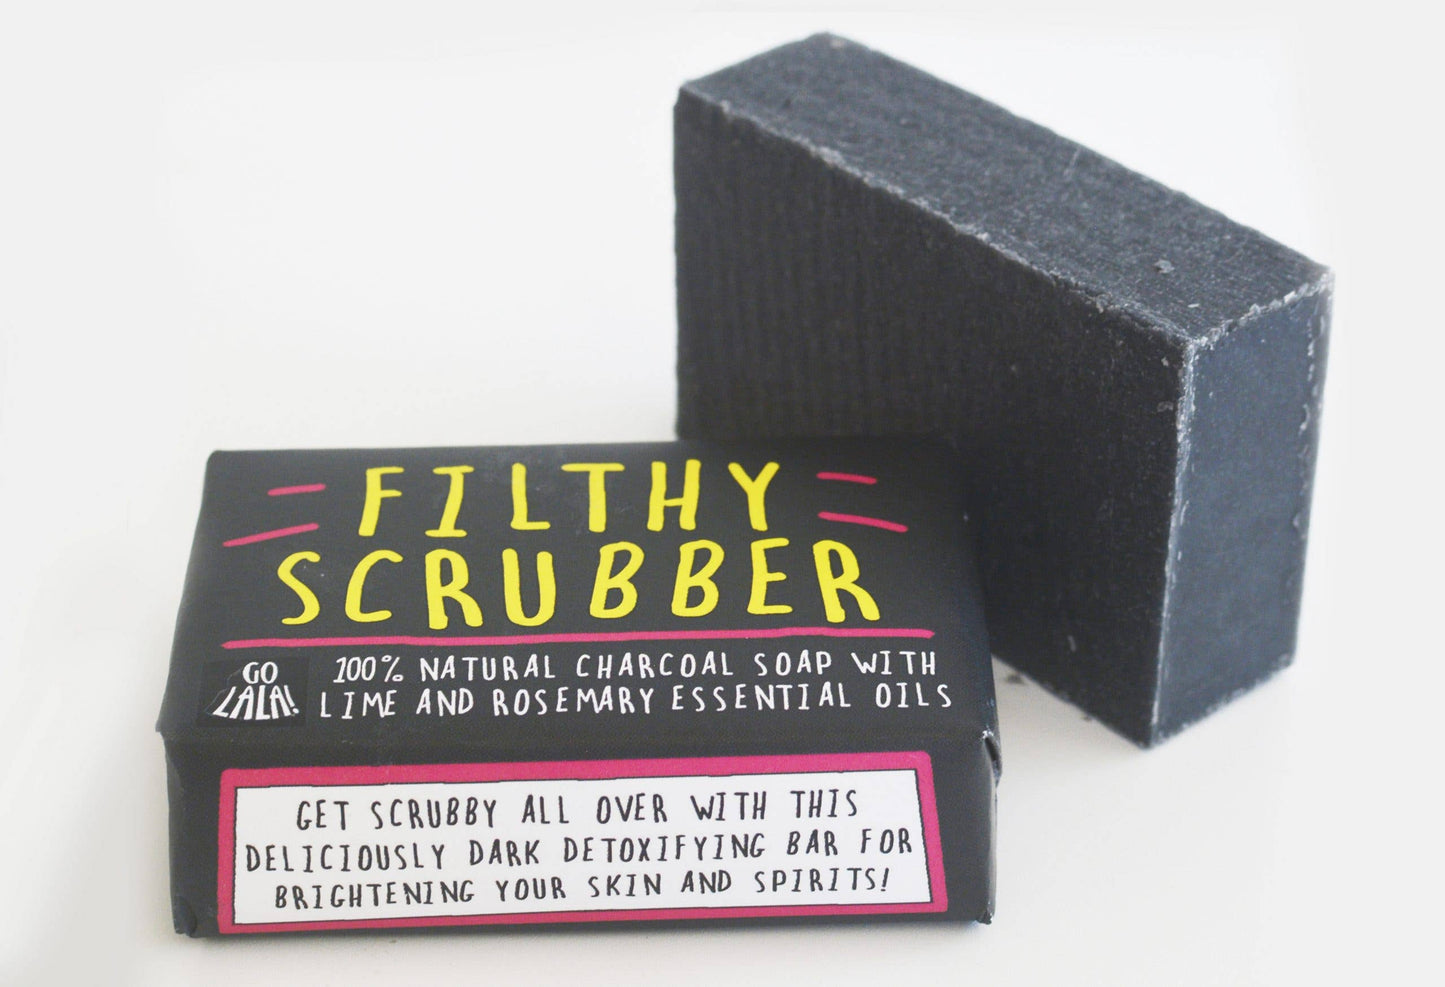 Filthy Scrubber Soap Bar Funny Rude Novelty Gift